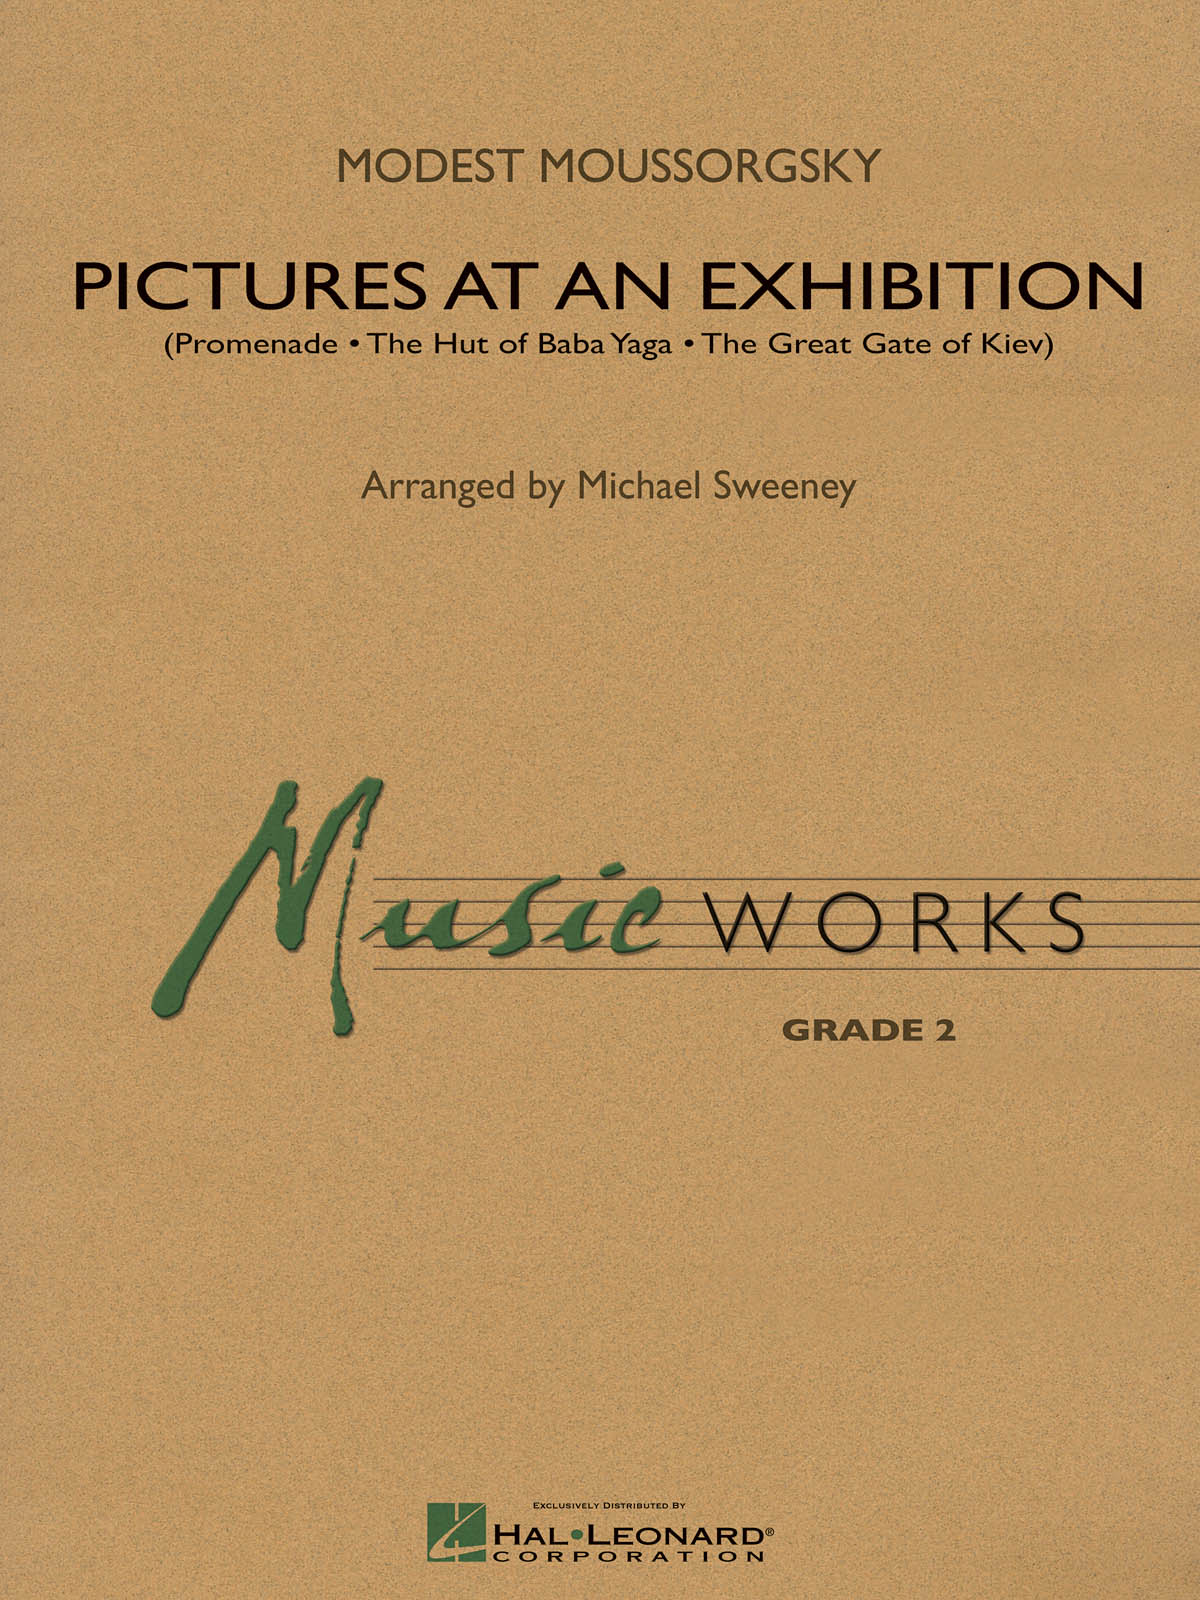 Modest Mussorgsky: Pictures at an Exhibition: Concert Band: Score & Parts